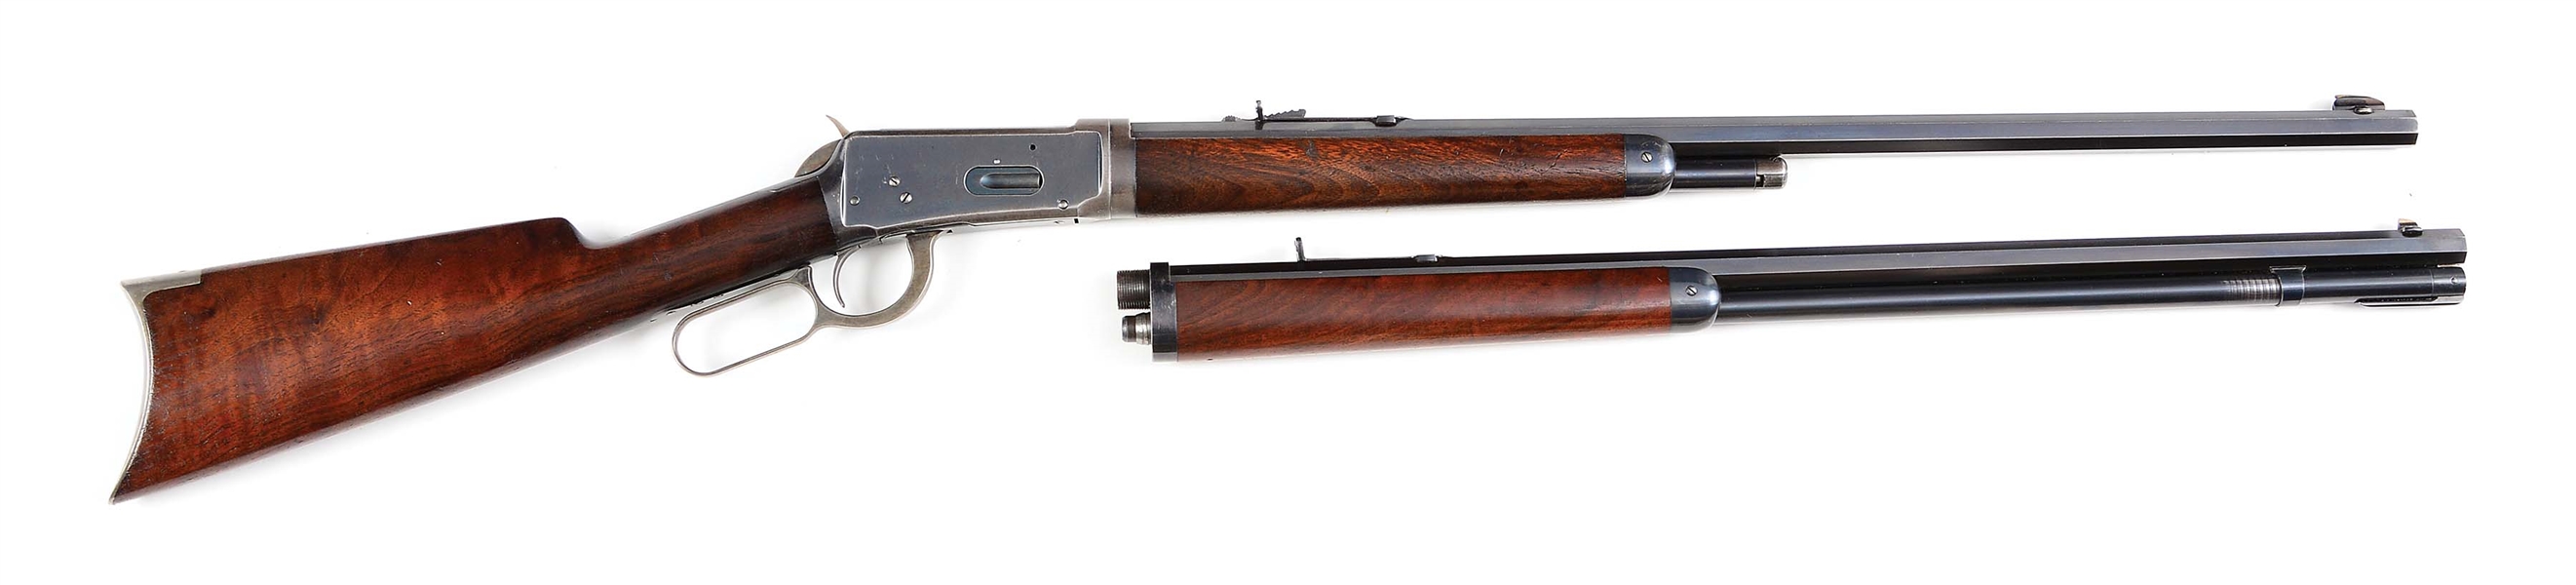 (A) WINCHESTER MODEL 1894 TAKEDOWN LEVER ACTION RIFLE - 2 BARREL SET (1902).